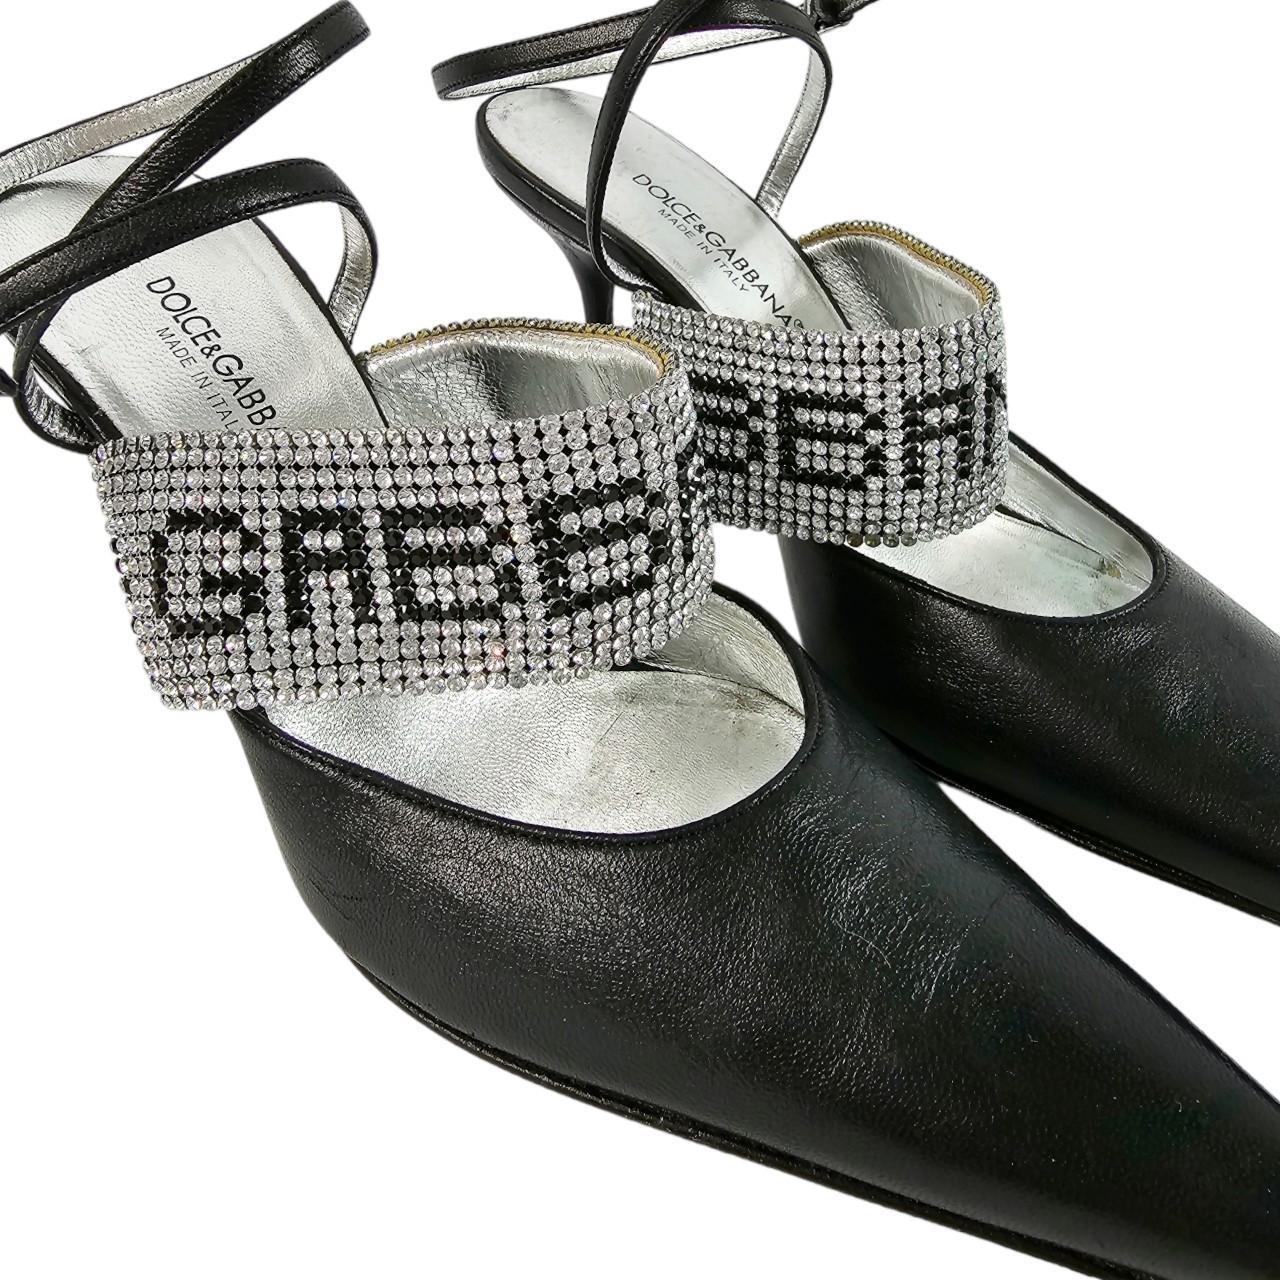 Dolce & Gabbana Women's Black and Silver Courts - 3